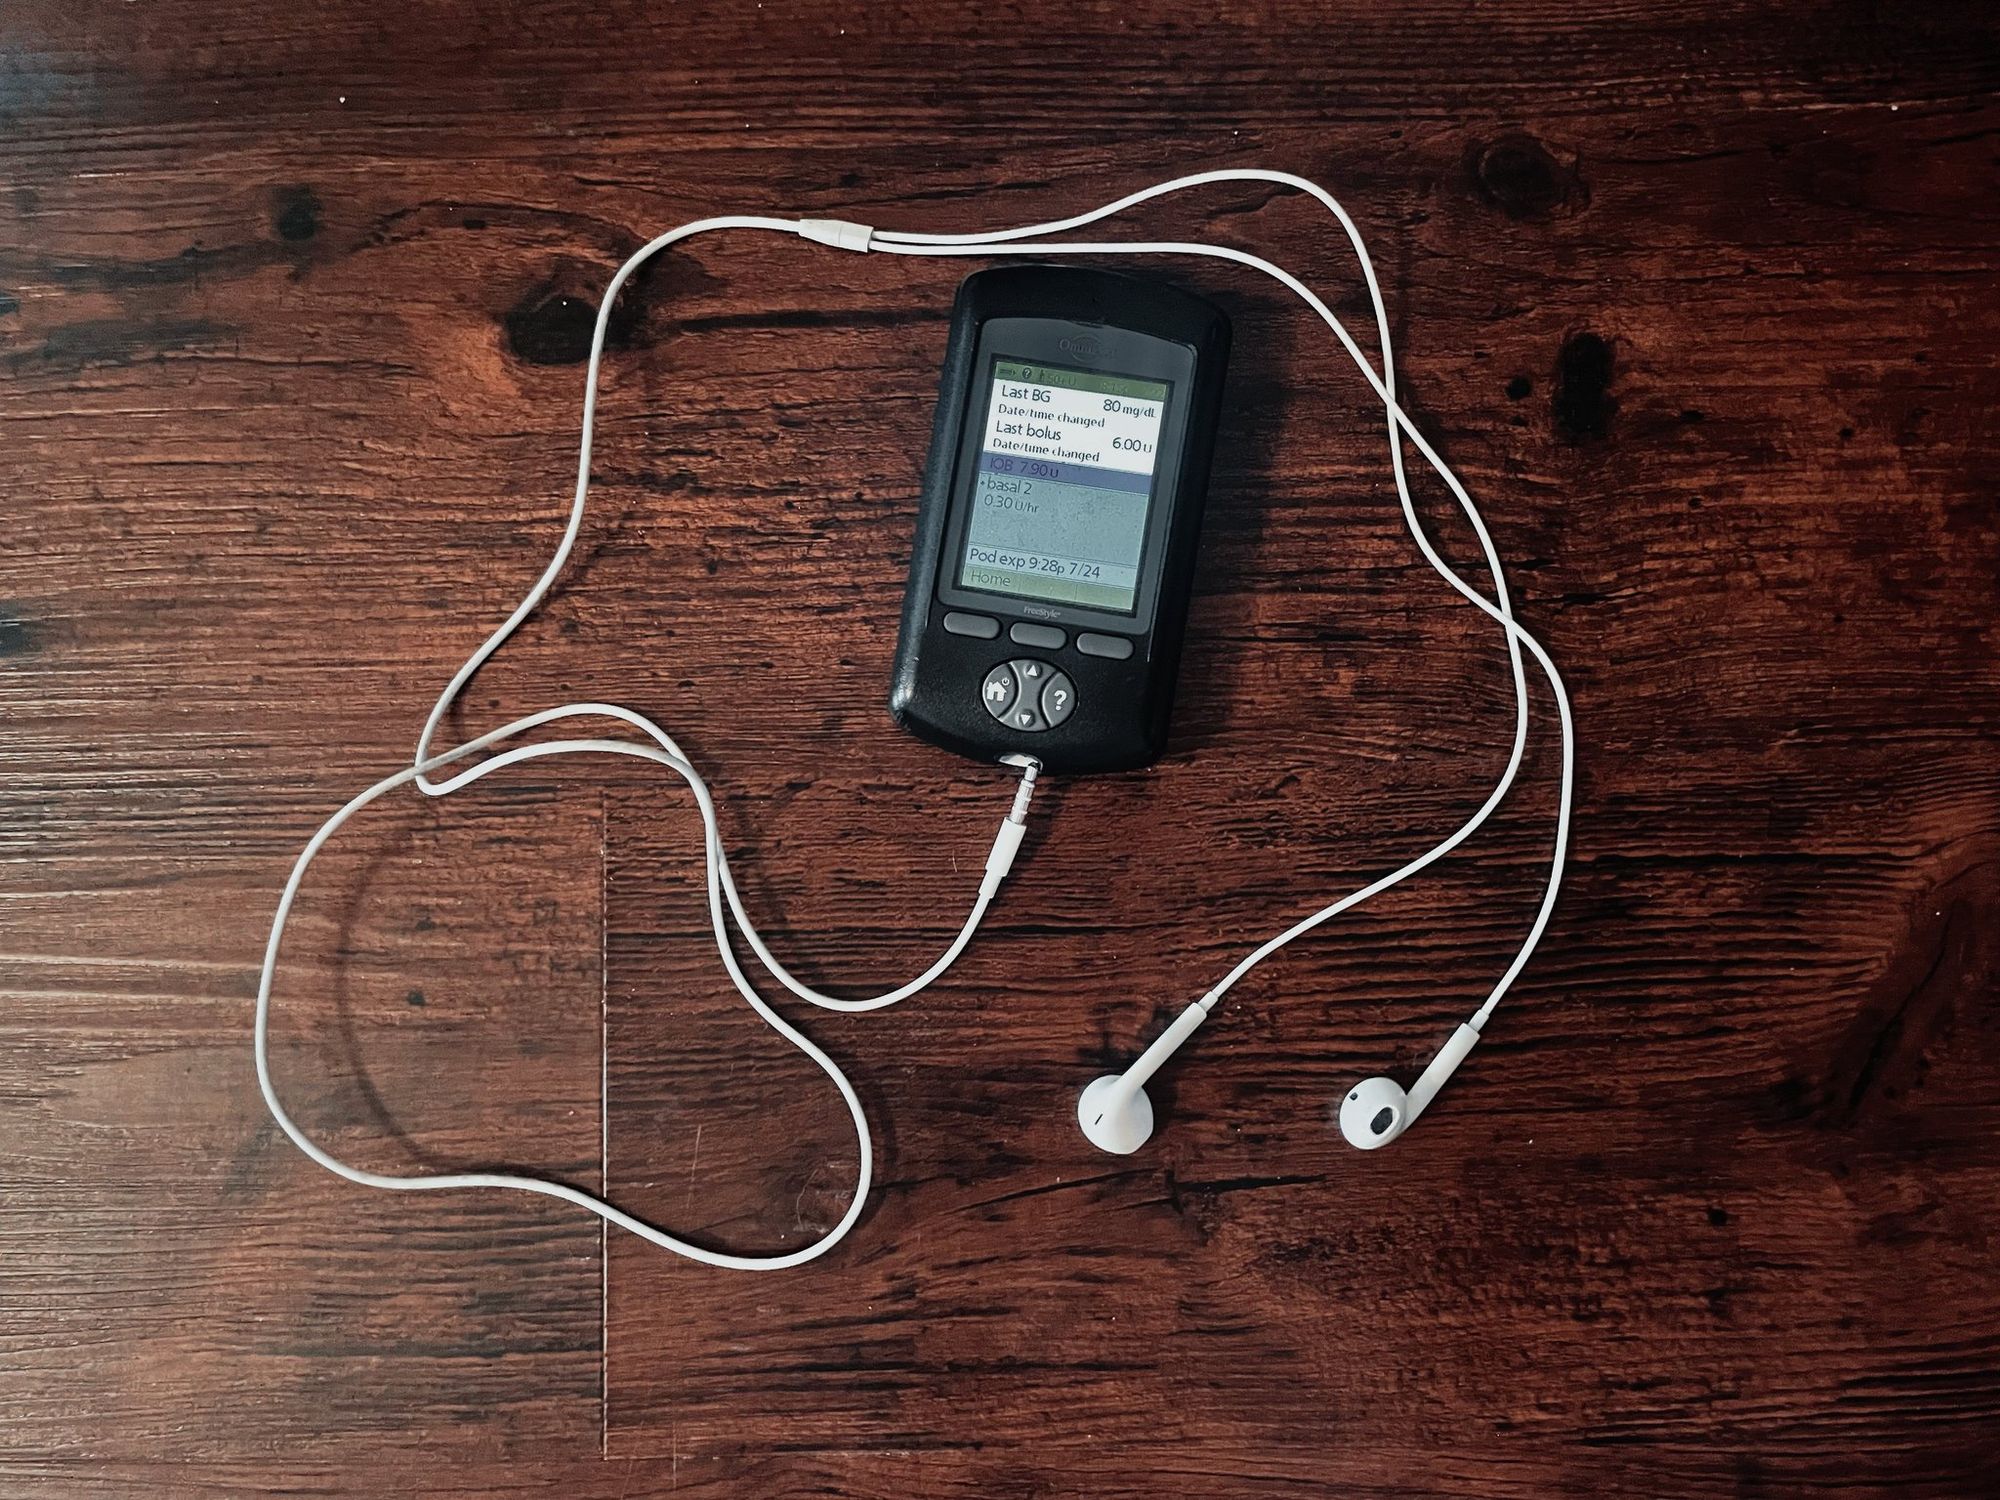 Earbuds curled around a personal diabetes manager showing the last measurement taken.